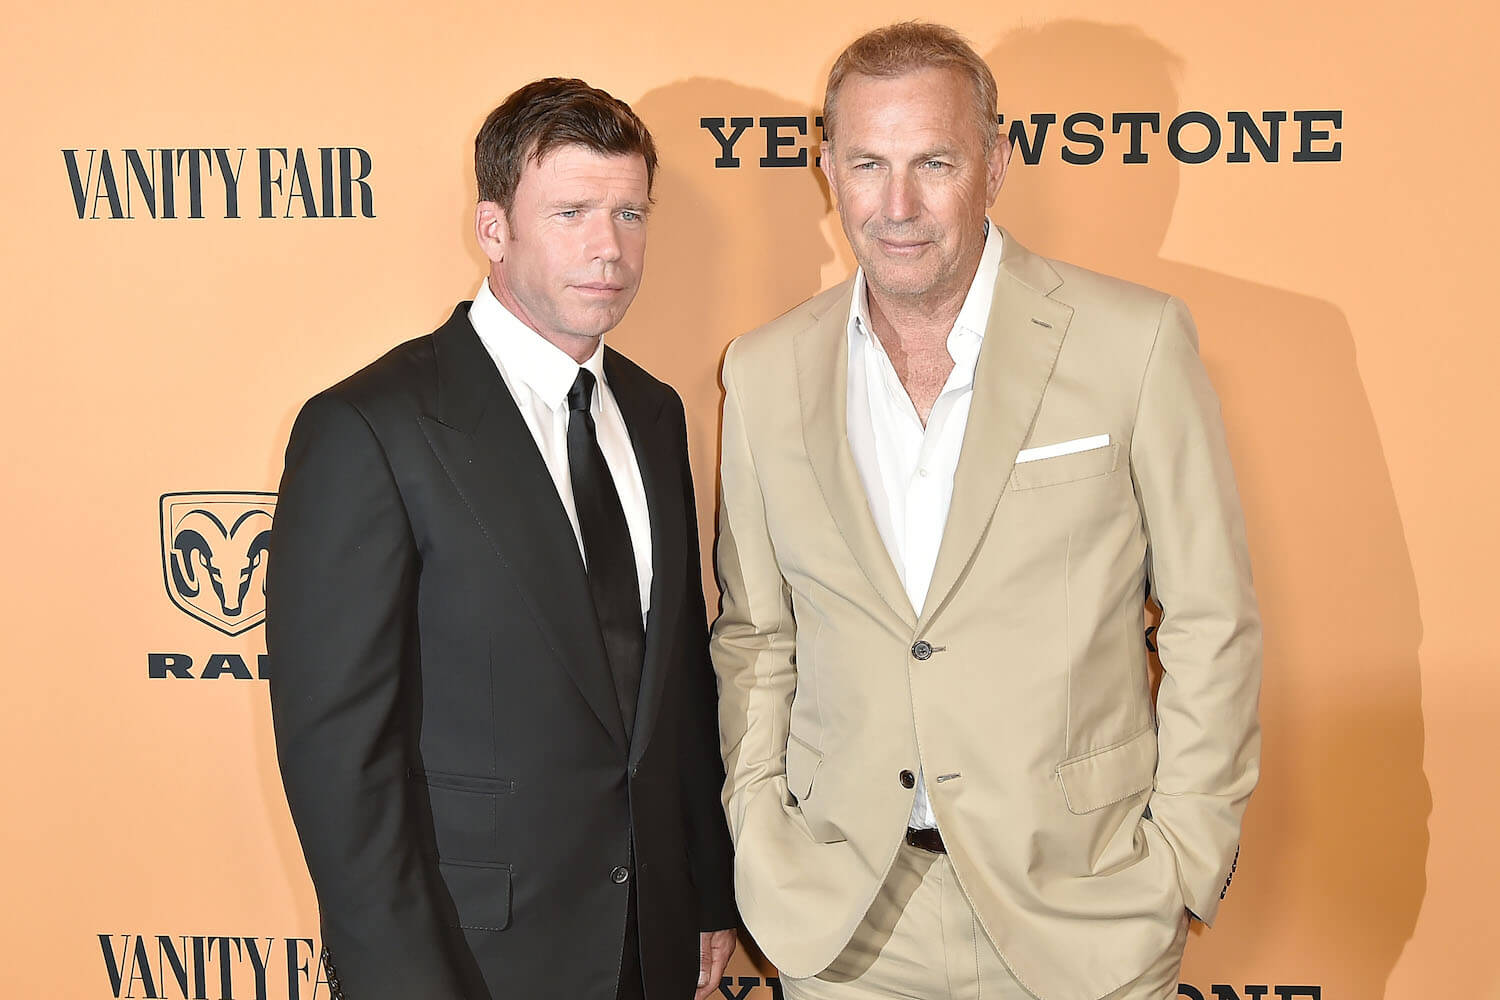 Taylor Sheridan and Kevin Costner from 'Yellowstone' Season 5 standing together at an event